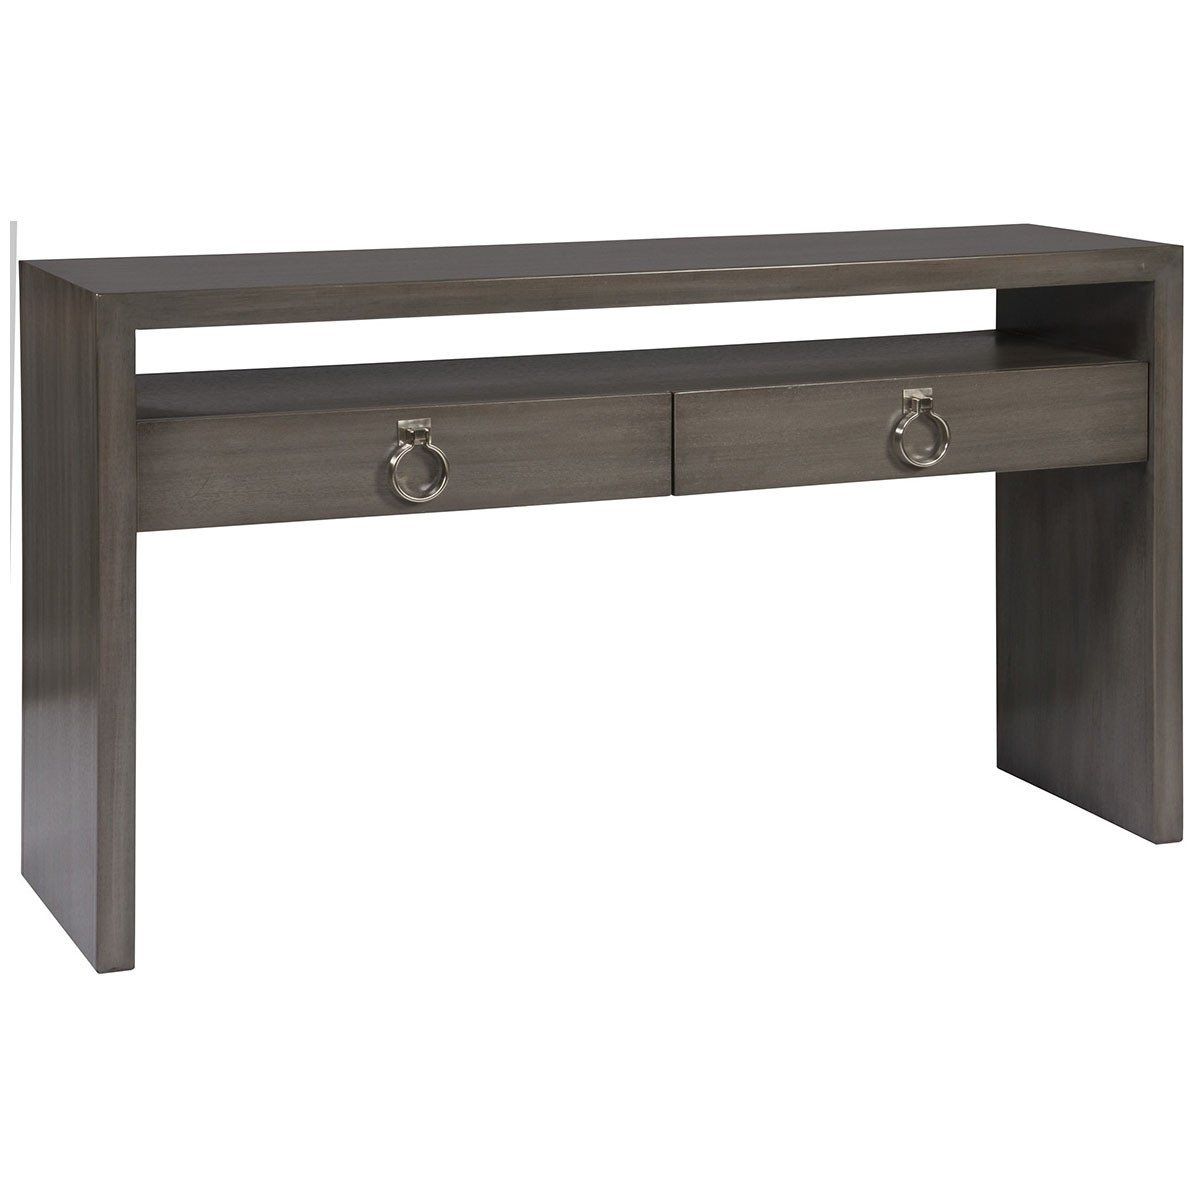 Vanguard Furniture Margo Console | Products | Furniture, Console Regarding Parsons Concrete Top &amp; Brass Base 48x16 Console Tables (View 8 of 30)